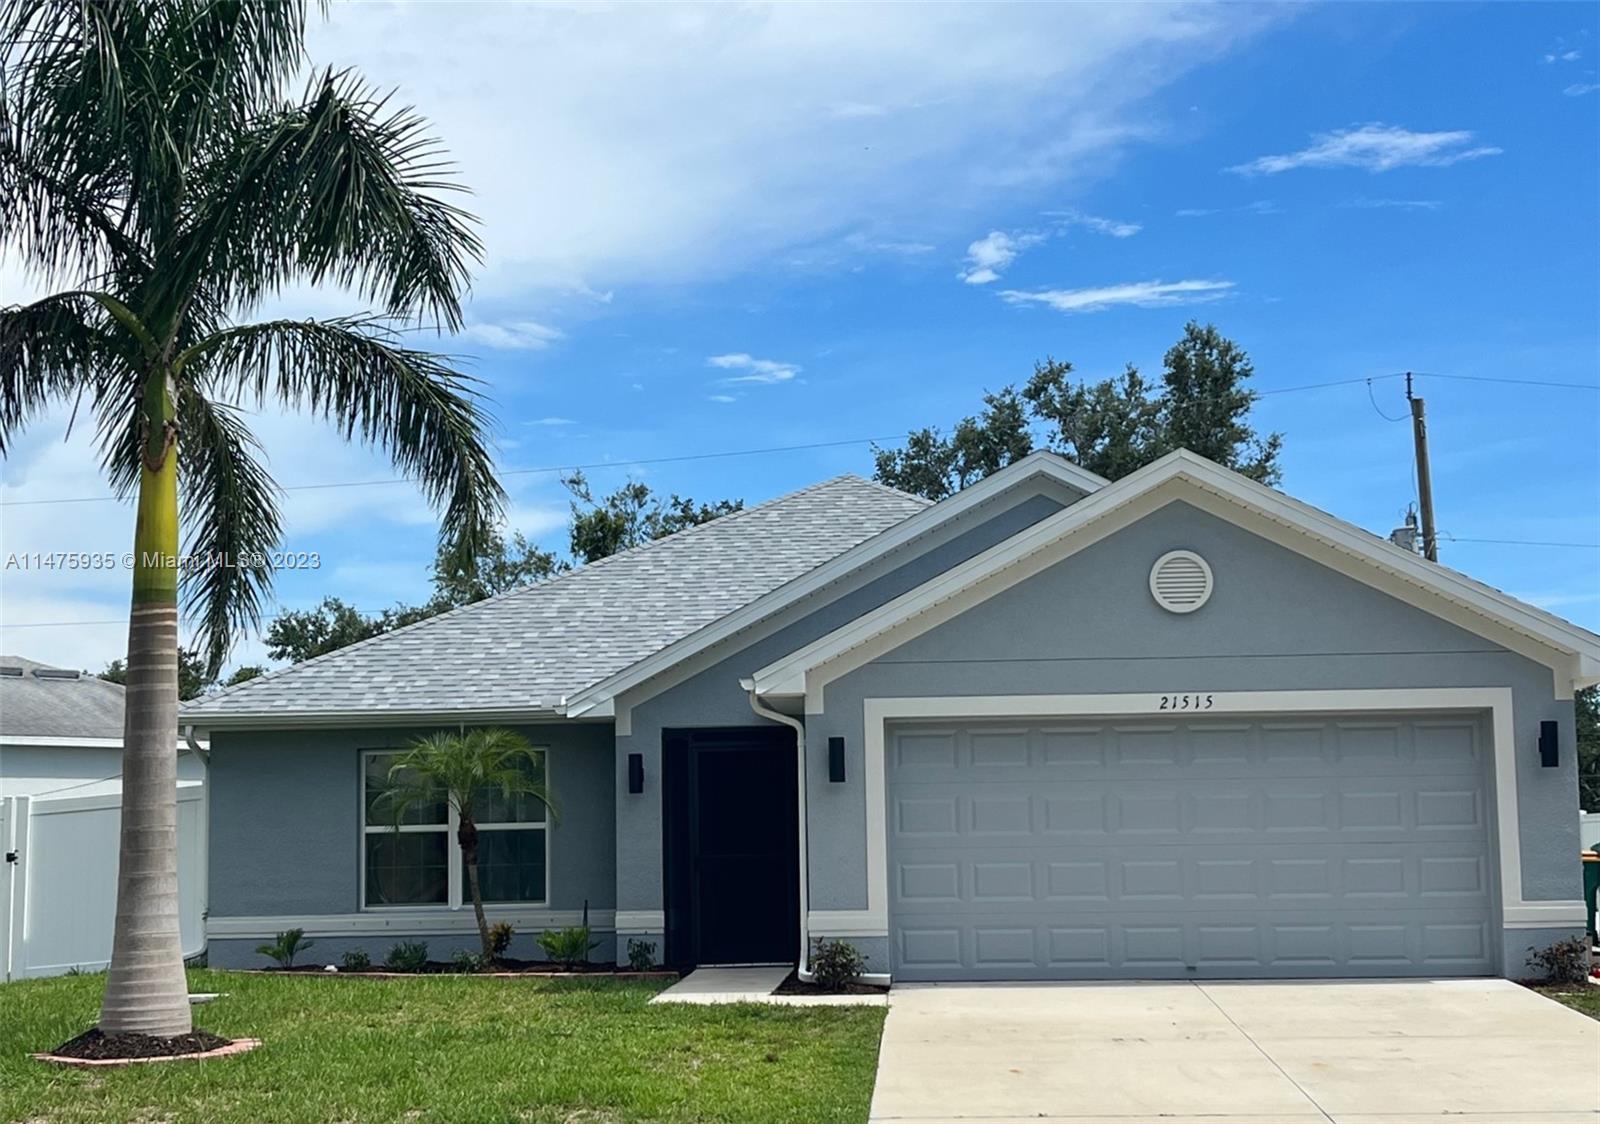 Photo of 21515 Voltair Ave in Port Charlotte, FL